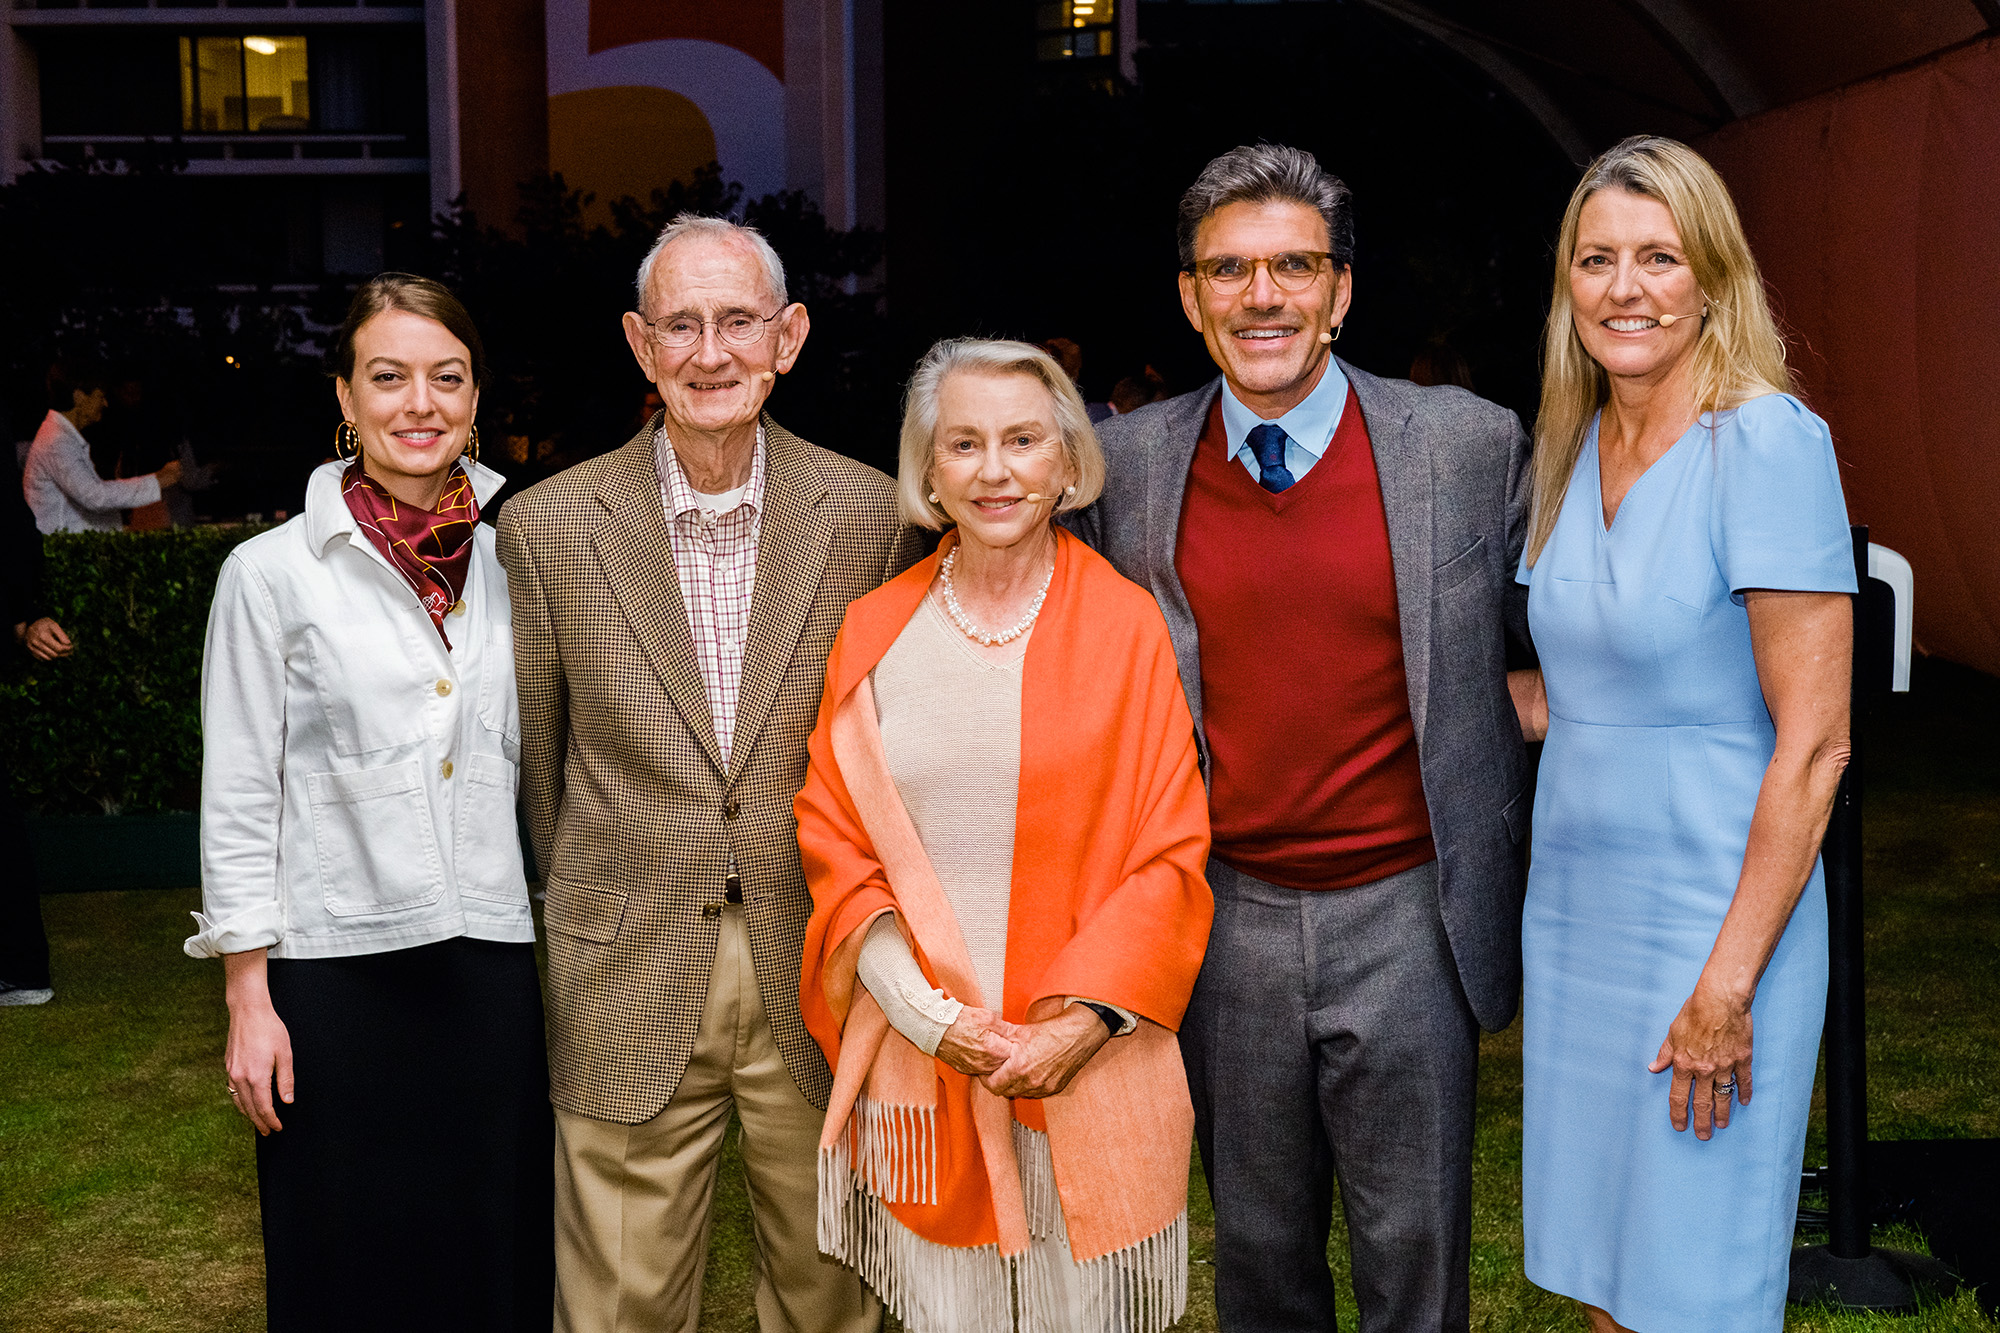 From left to right: a CMC community member photographed together with Jack Stark ’57 GP’11, Pamela Gann, Hiram Chodosh, and Sue Matteson King ’85 P’18 at CMC's 2022 Alumni Weekend.